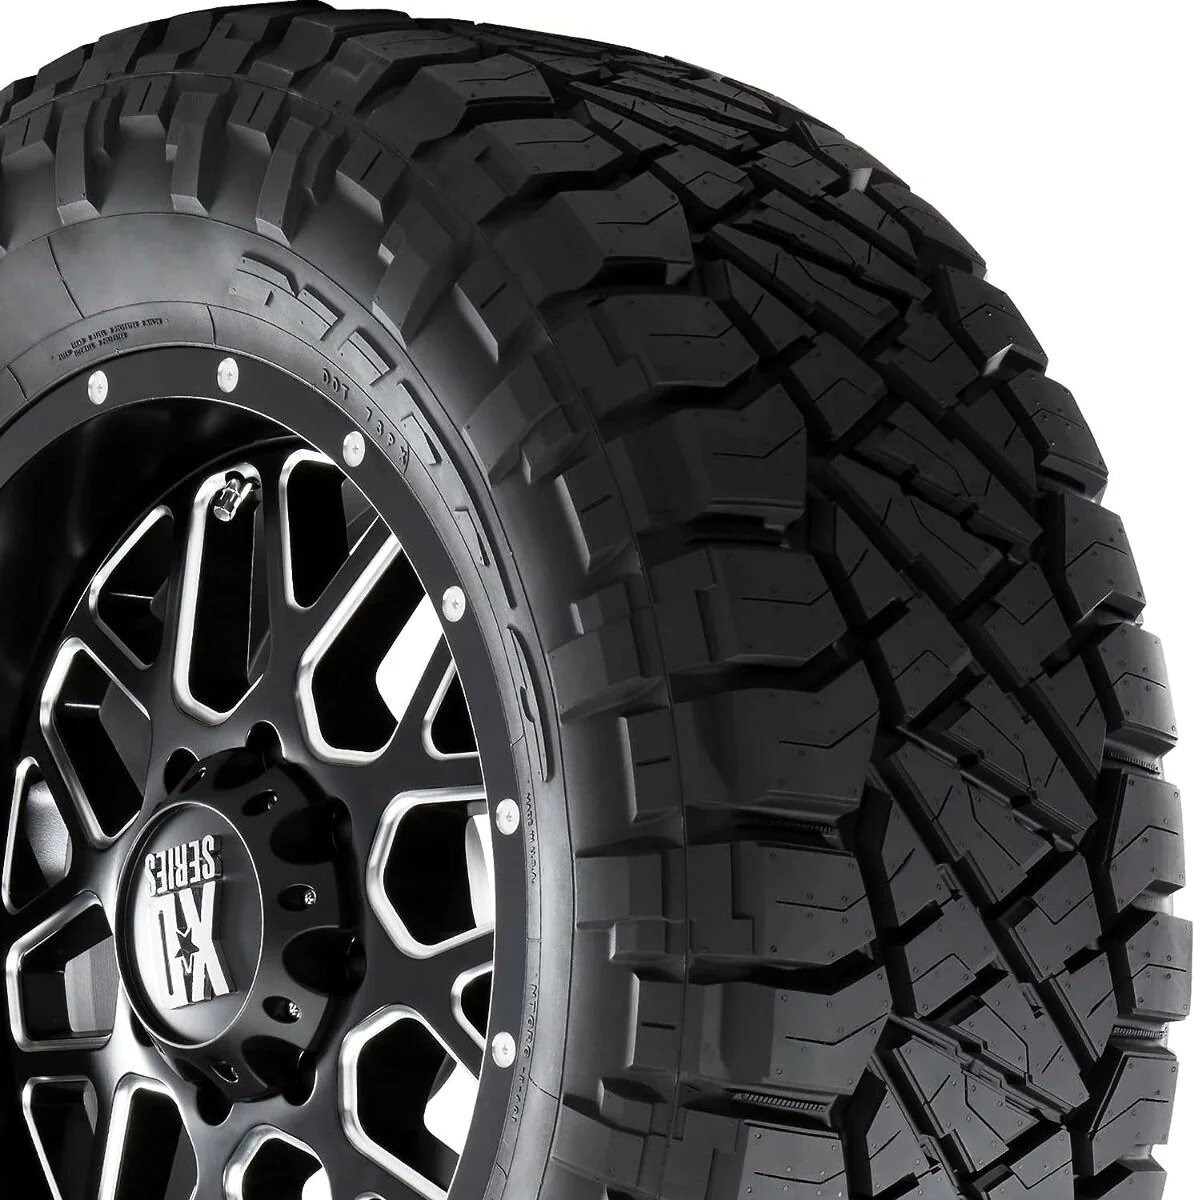 Ford Bronco Nitto Ridge Grappler Tire 265/70-16 for Ford Bronco - 217930 whp-217930-x2-f7ac72e91a9b37b87481b04c8fb52bd7eb07e9ad-5